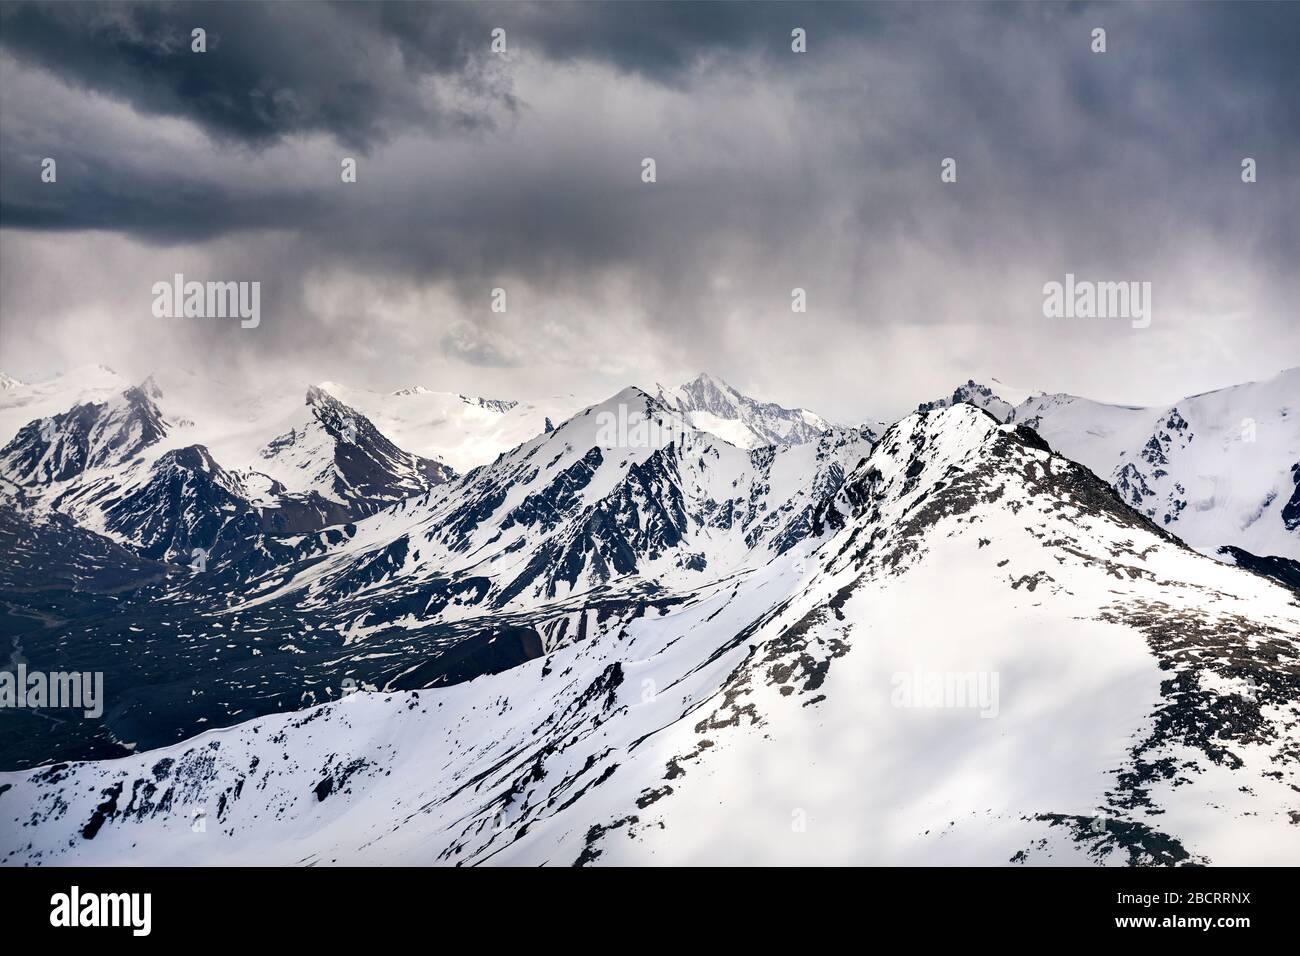 Landscape of Snowy Mountains with overcast stormy sky background Stock Photo